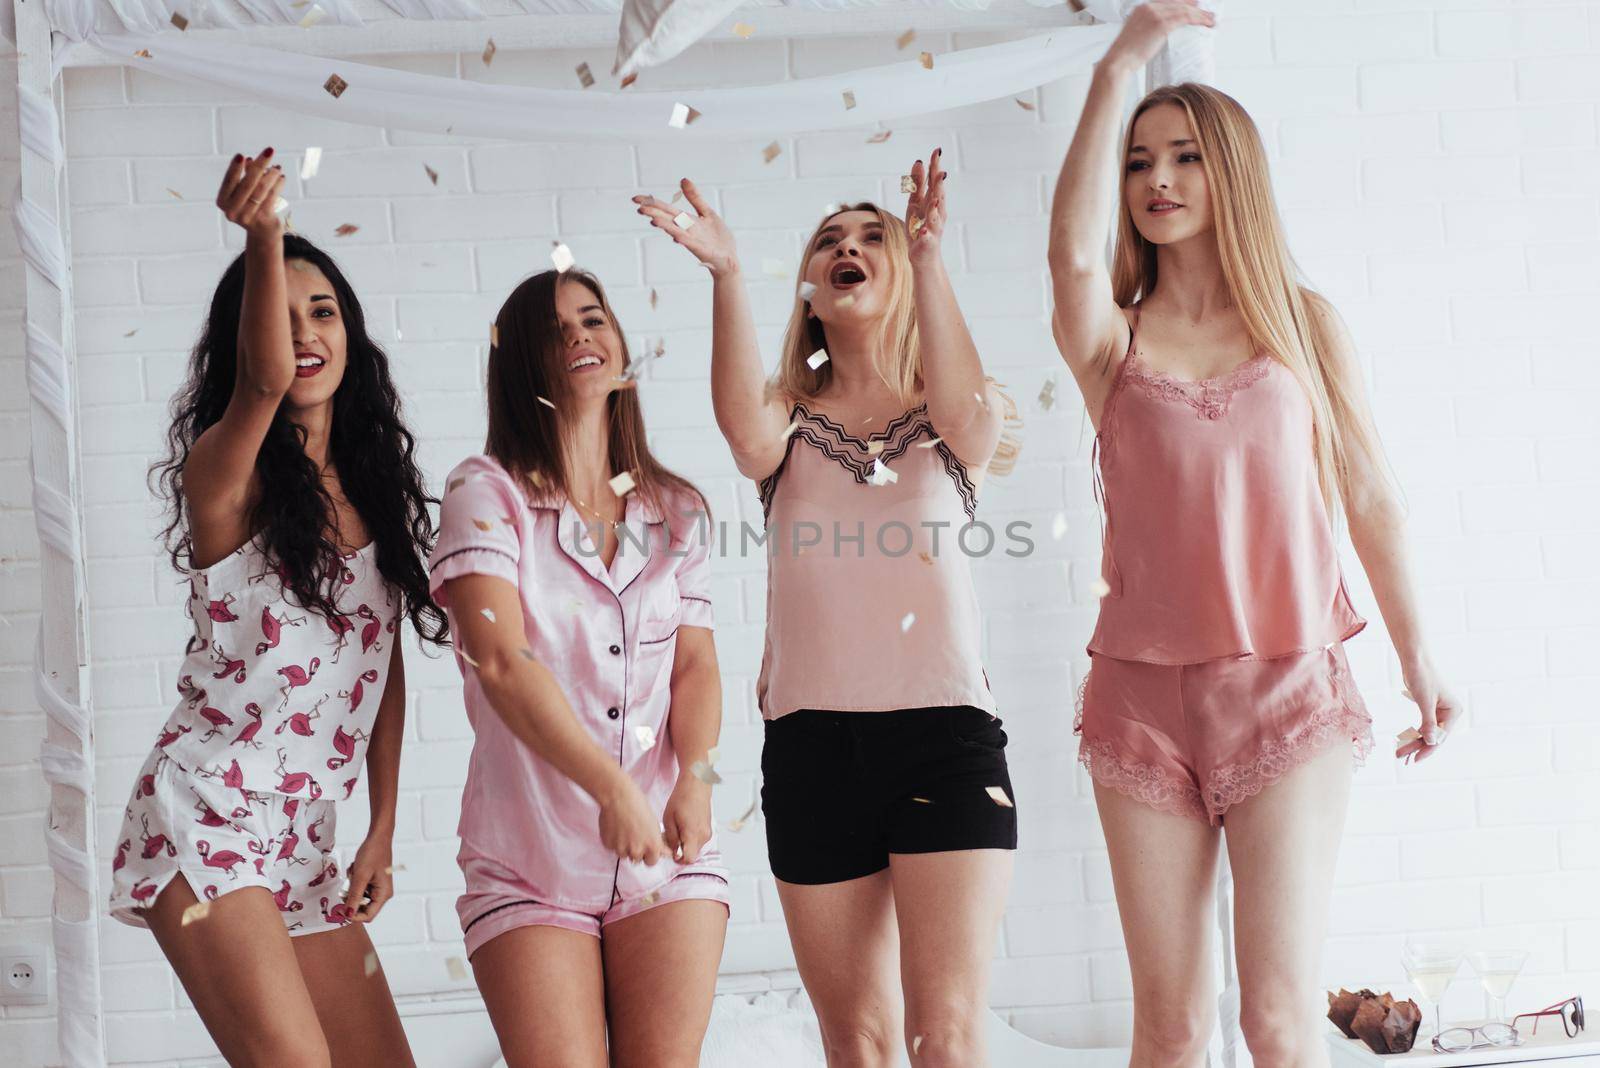 Look at these flying things. Confetti in the air. Young girls have fun on the white bed in nice room by Standret